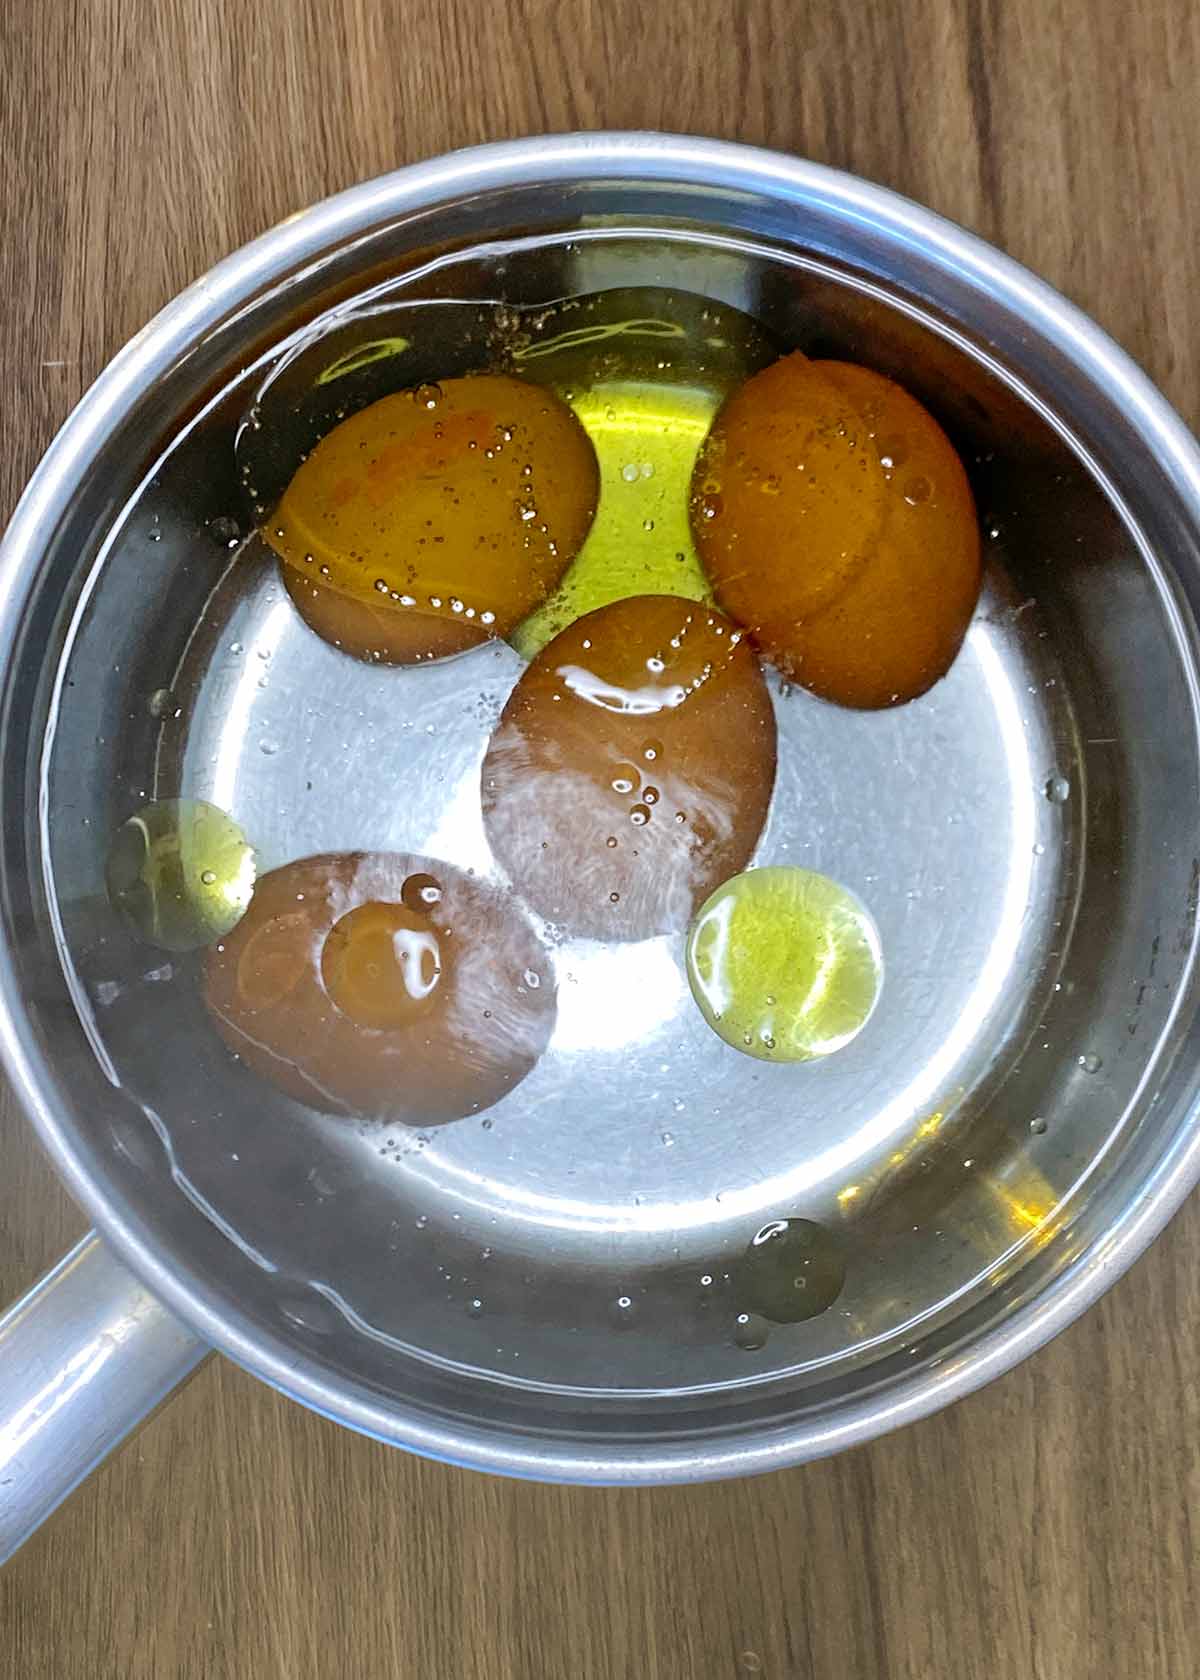 Four eggs and some oil in a pan of water.